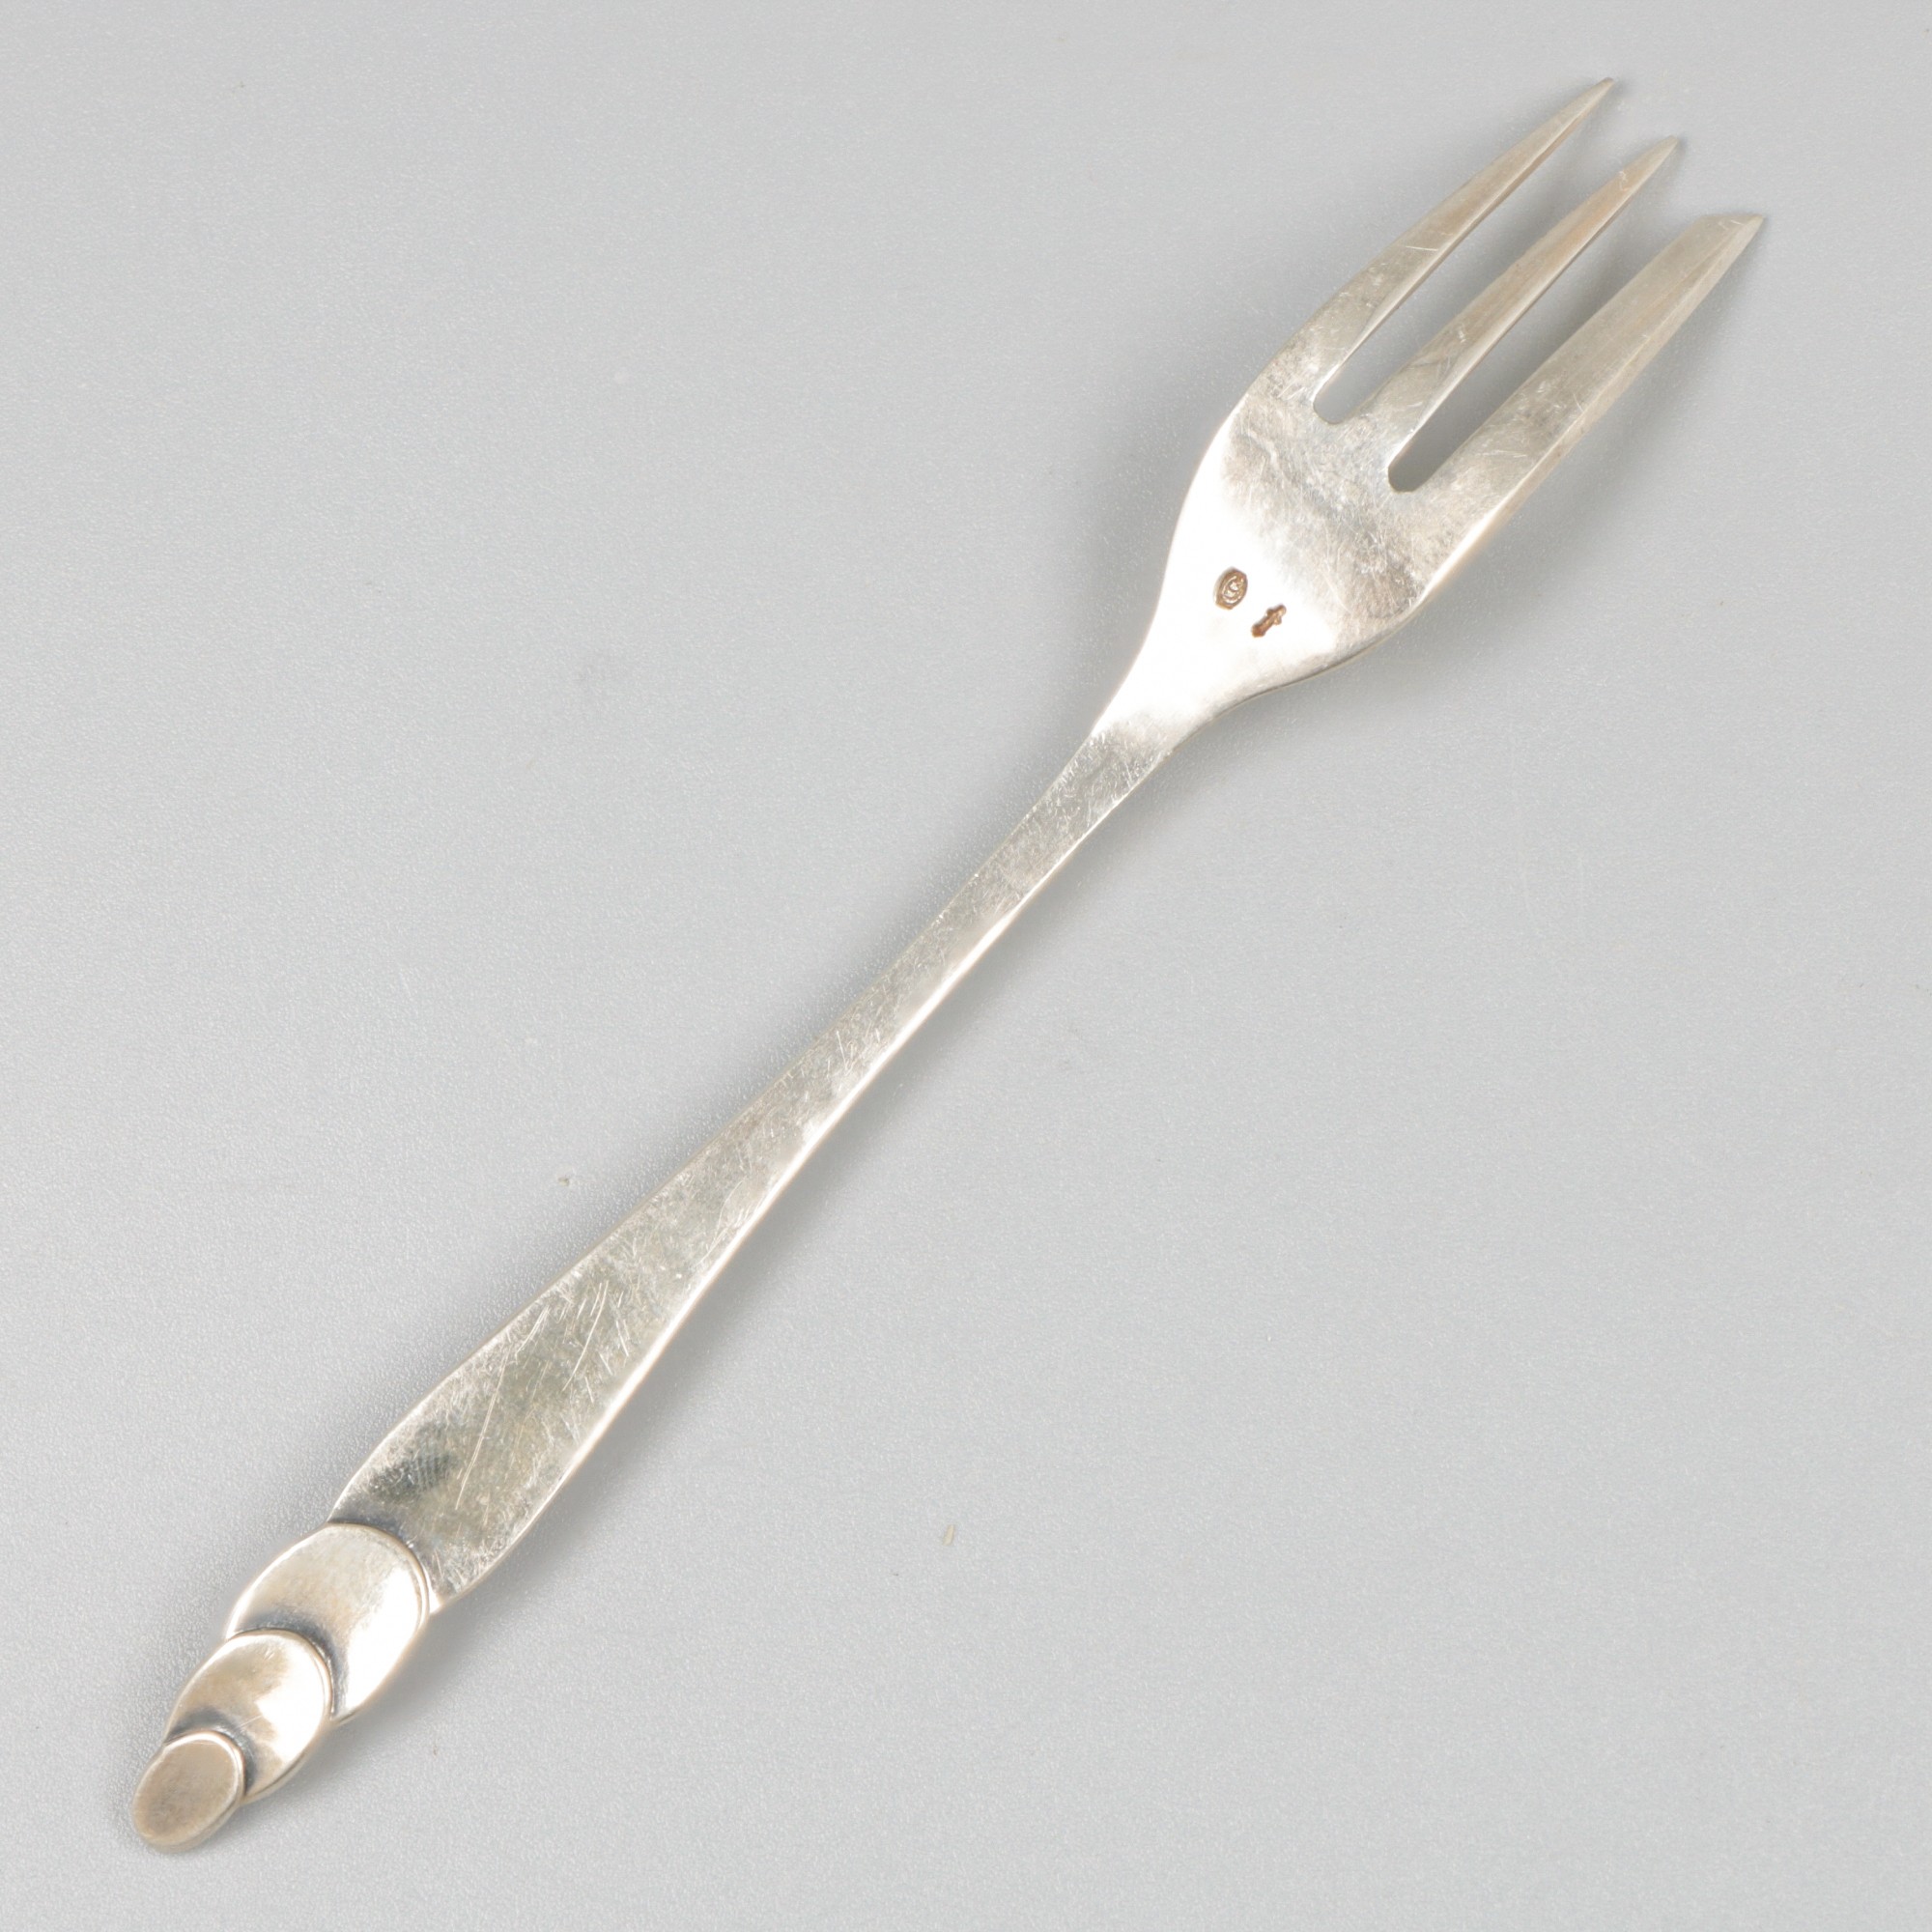 12-piece set of cake / pastry forks silver. - Image 4 of 5